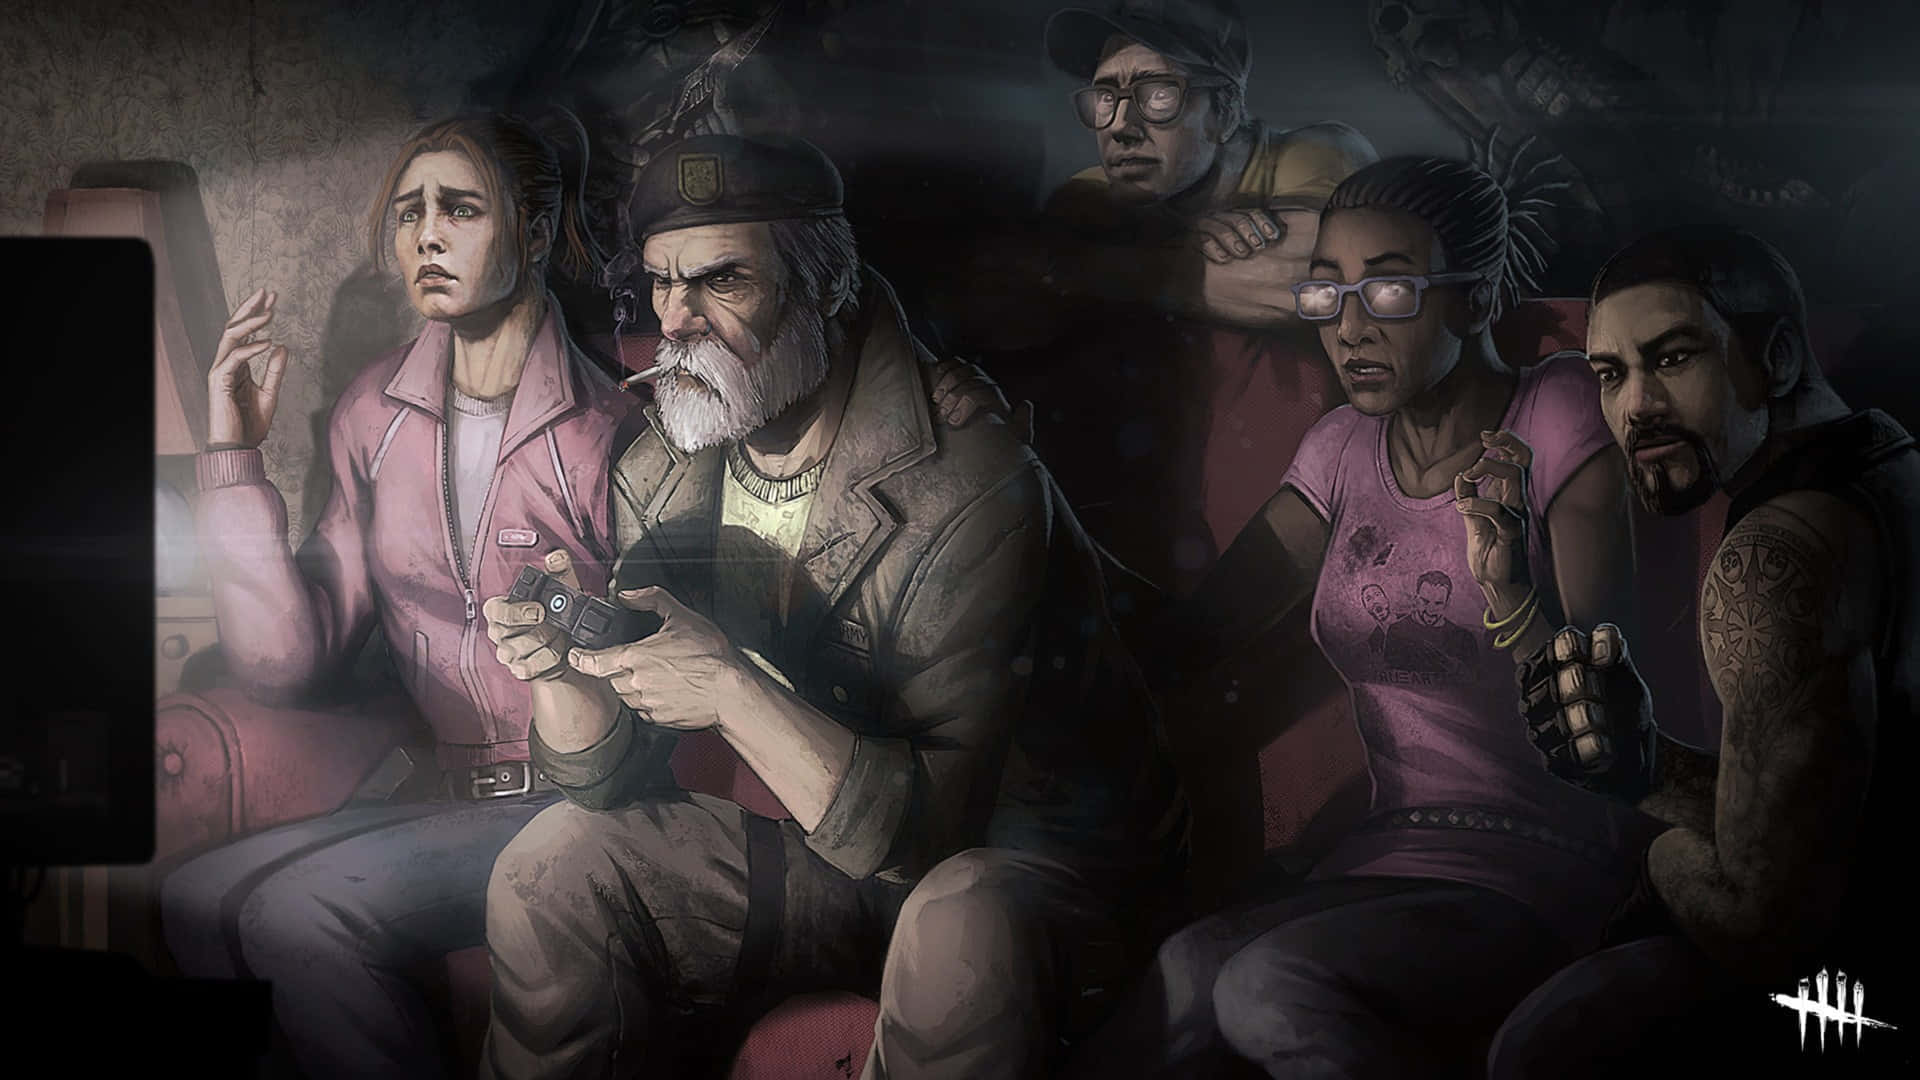 Captivating Left 4 Dead Characters in Action Wallpaper